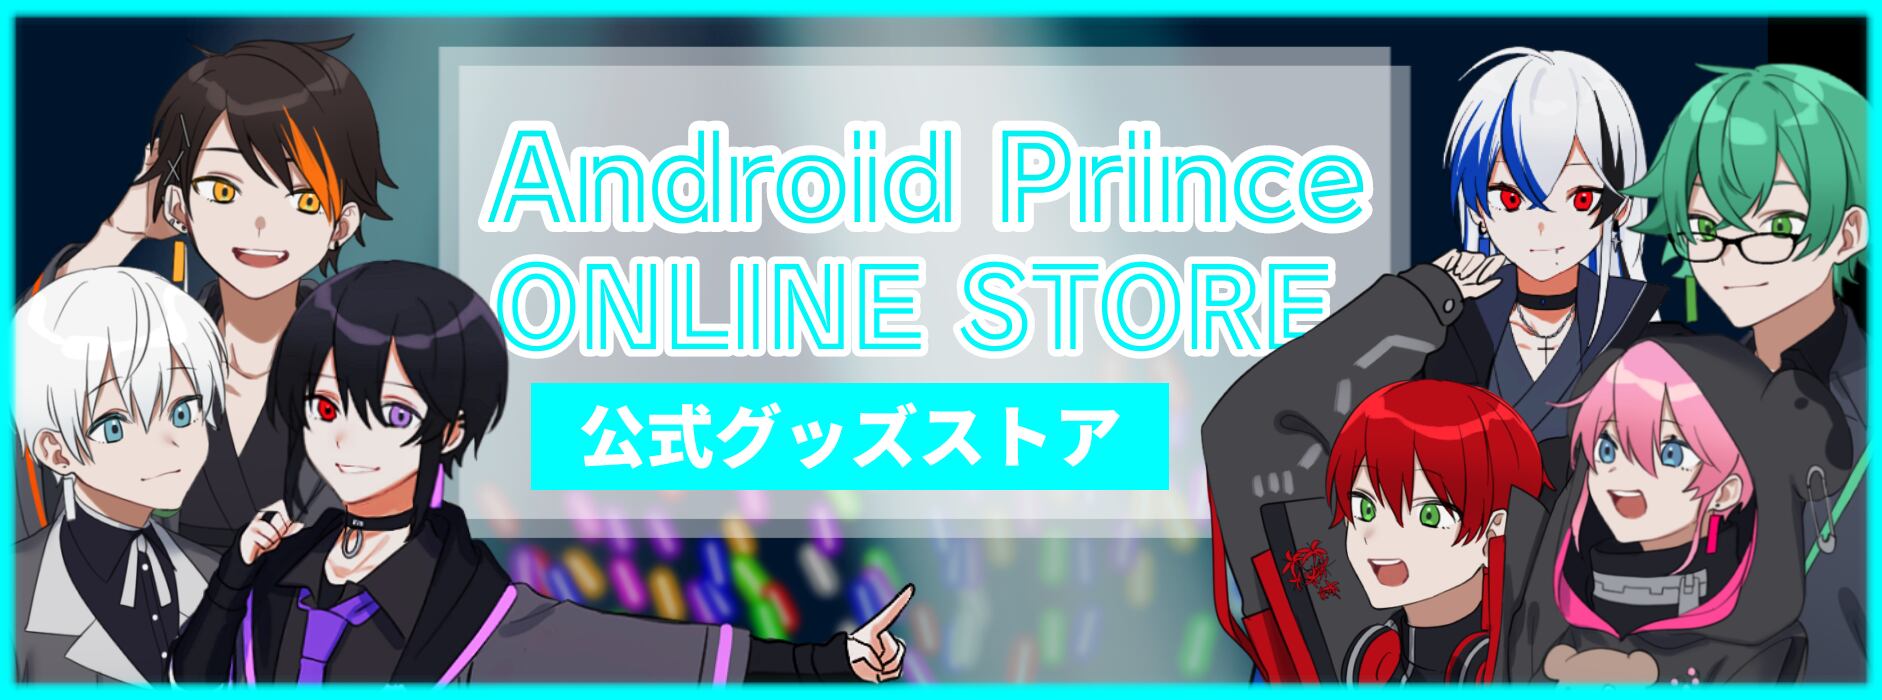 Android prince公式ショップ